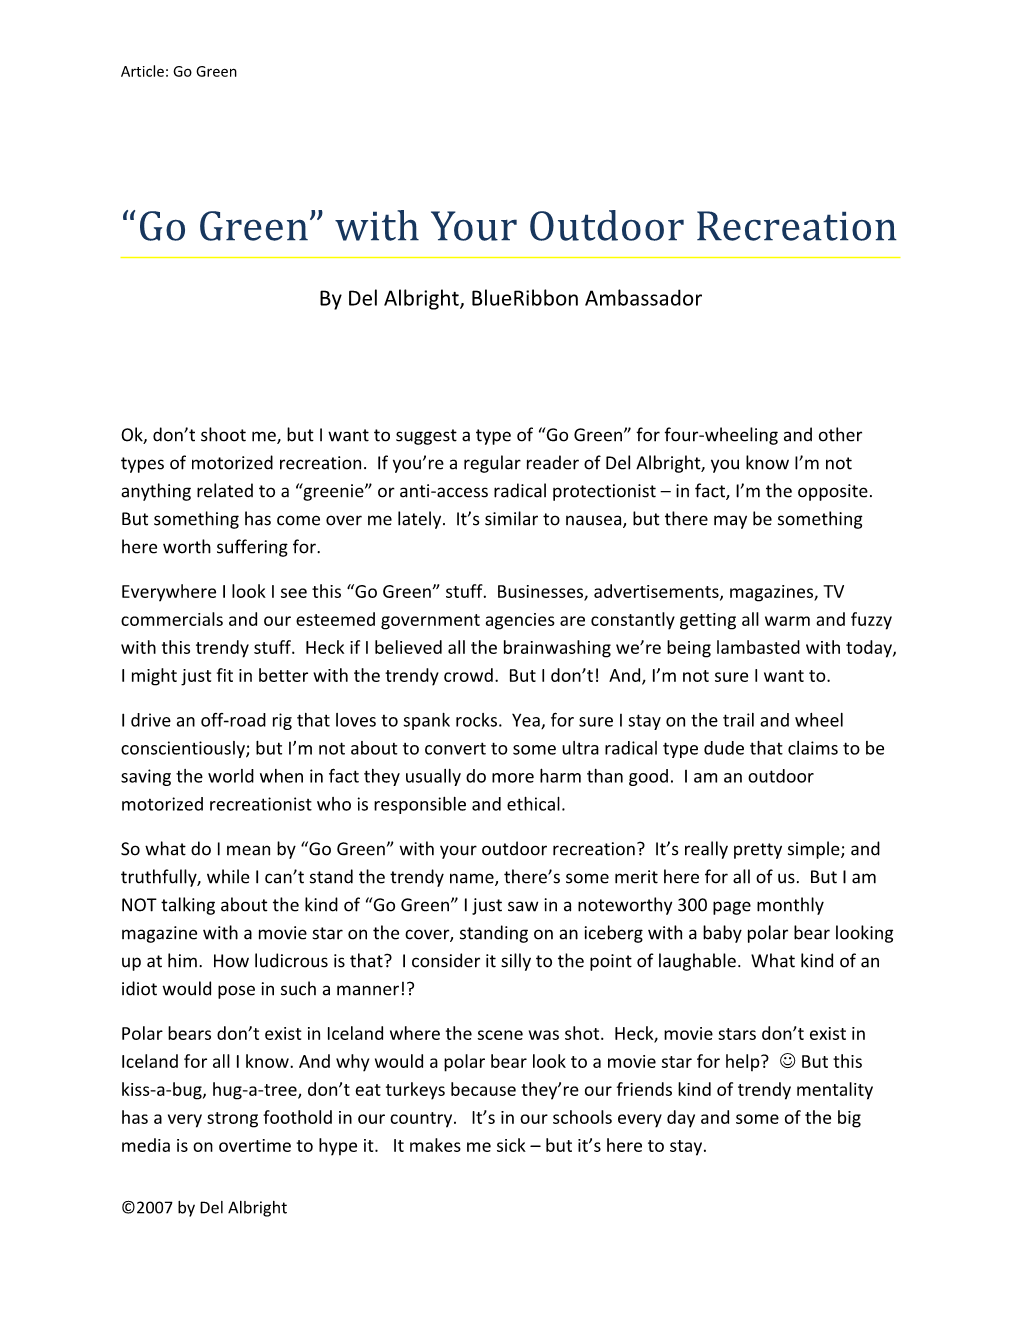 Go Green with Your Outdoor Recreation